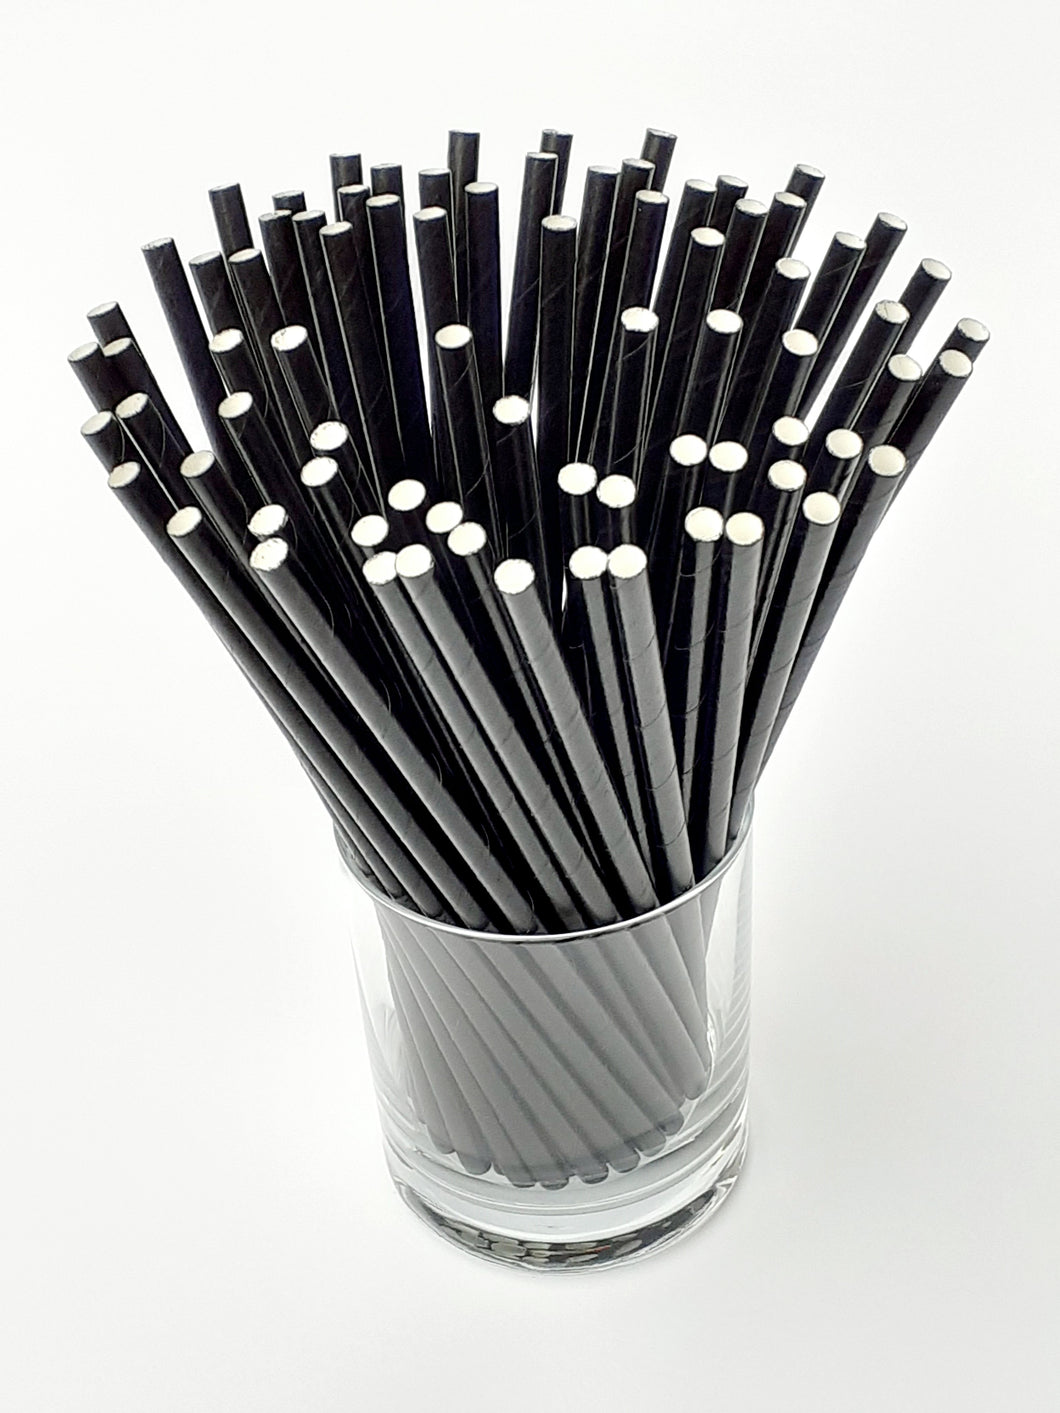 Black paper straws made in UK. Our biodegradable eco friendly paper straws are recyclable with a low carbon footprint. Say no to plastic – our planet matters.